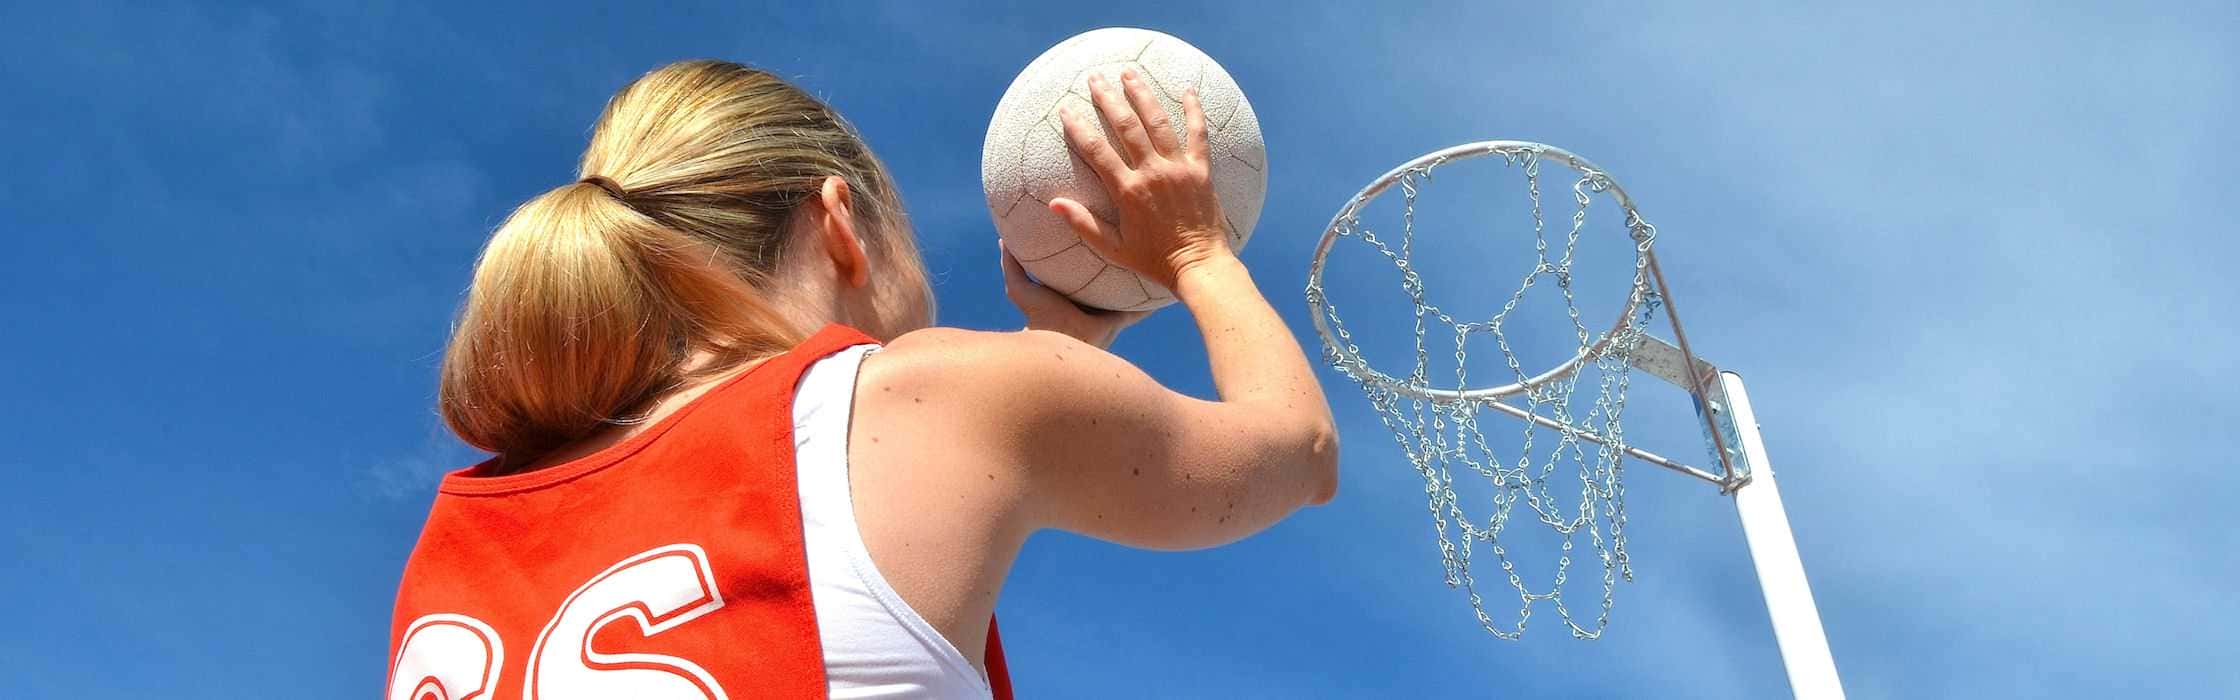 Netball in Liverpool